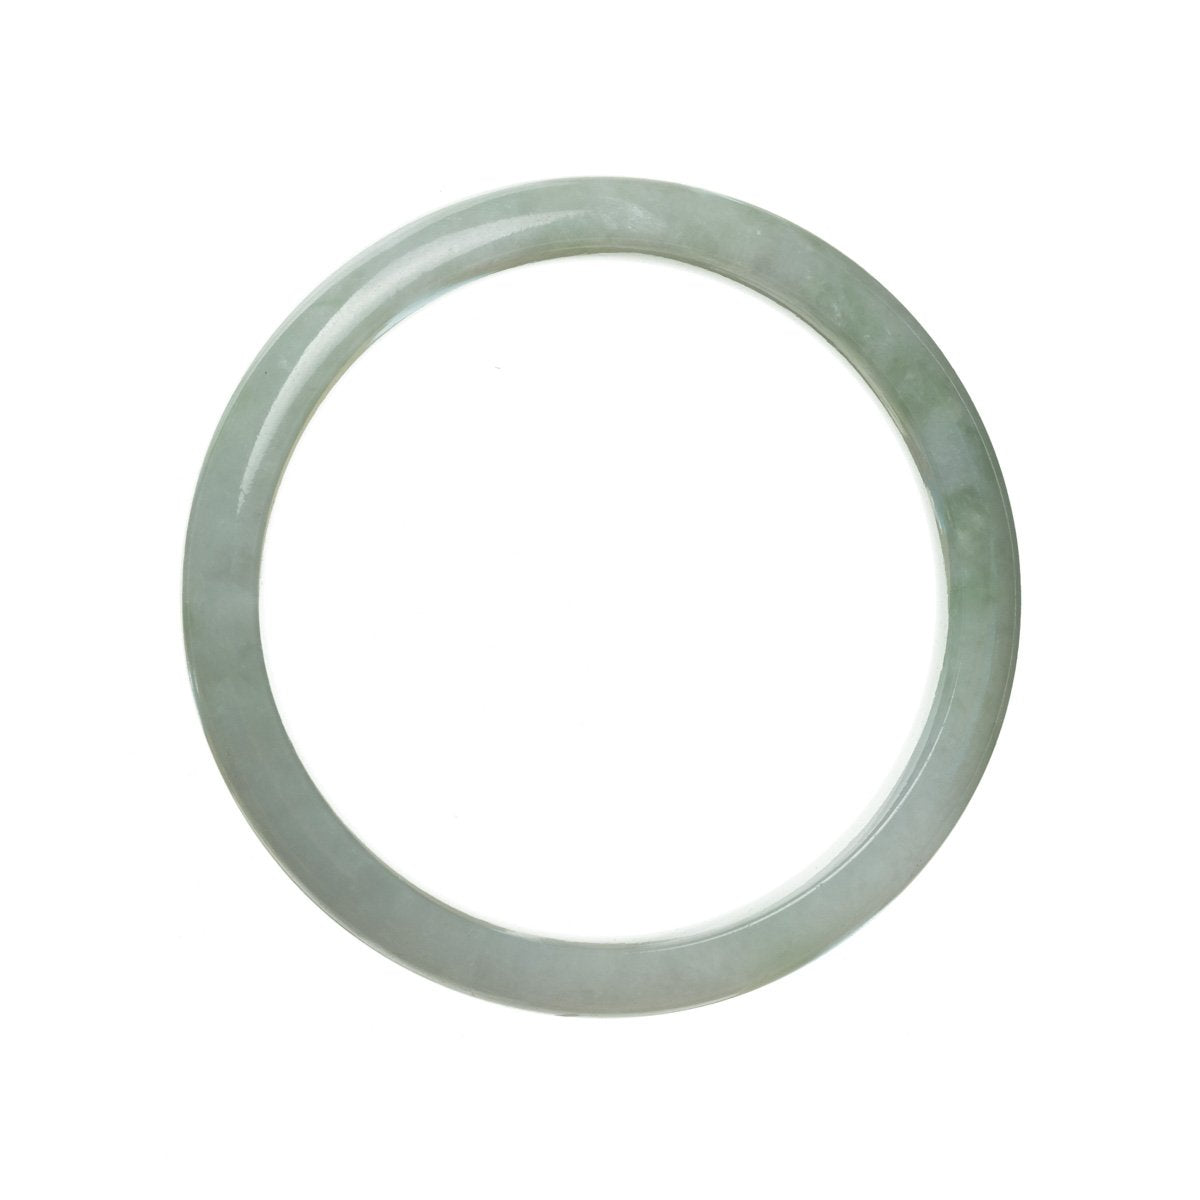 An elegant pale green lavender jade bangle bracelet in a half moon shape, crafted with authentic Grade A jade.